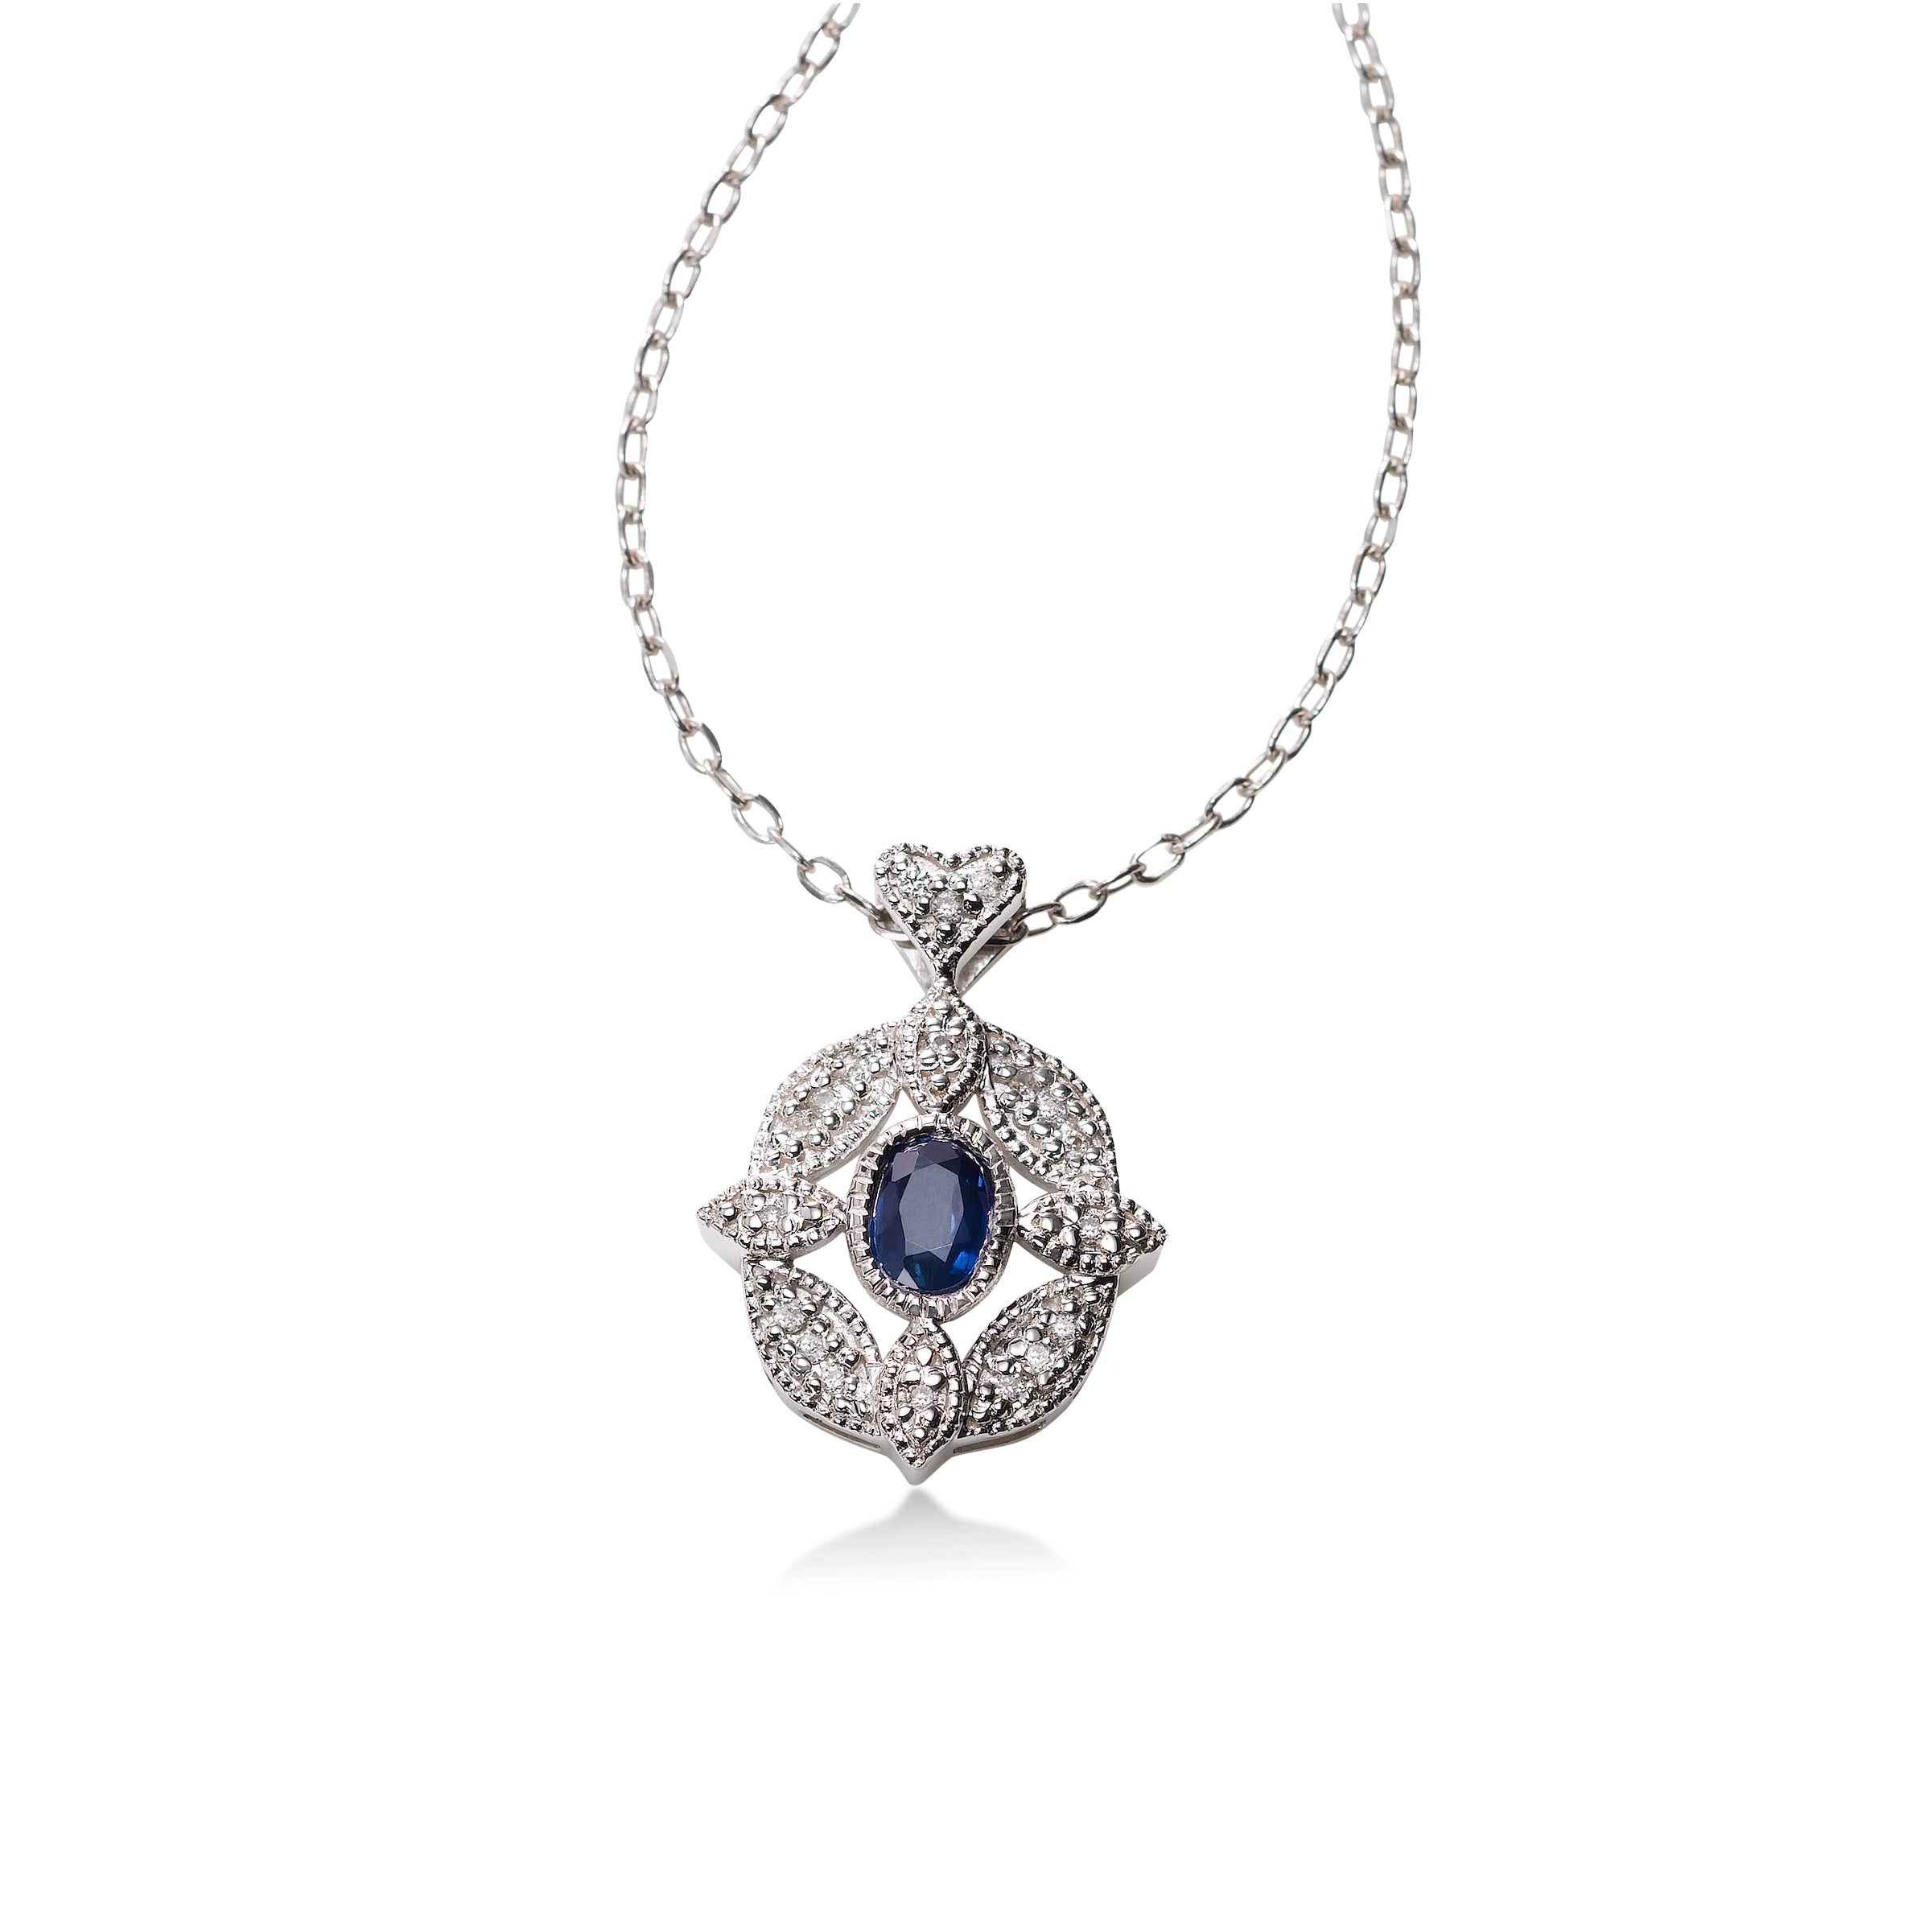 Buy Blue Sapphire Diamond Halo Pendant Necklace in 14K White Gold, Oval  Diamond Necklace With Dainty Chain Online in India - Etsy